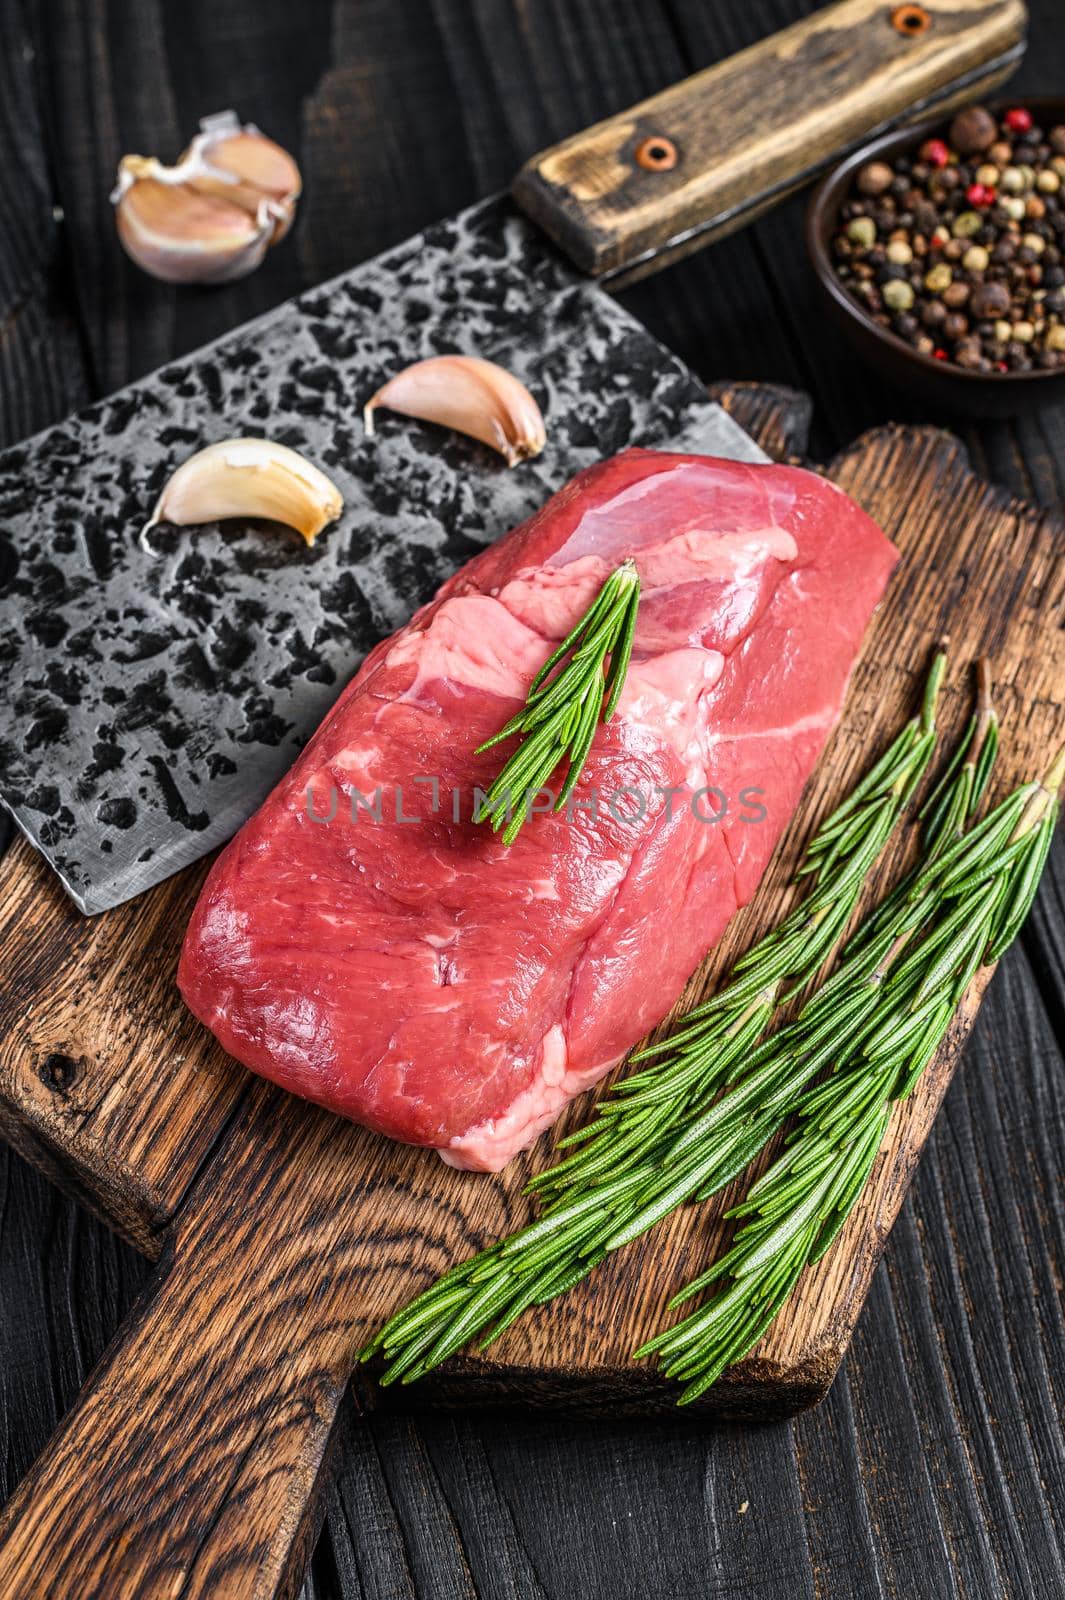 Fresh Raw veal sirloin meat steak on a wooden cutting board. Black wooden background. Top view by Composter